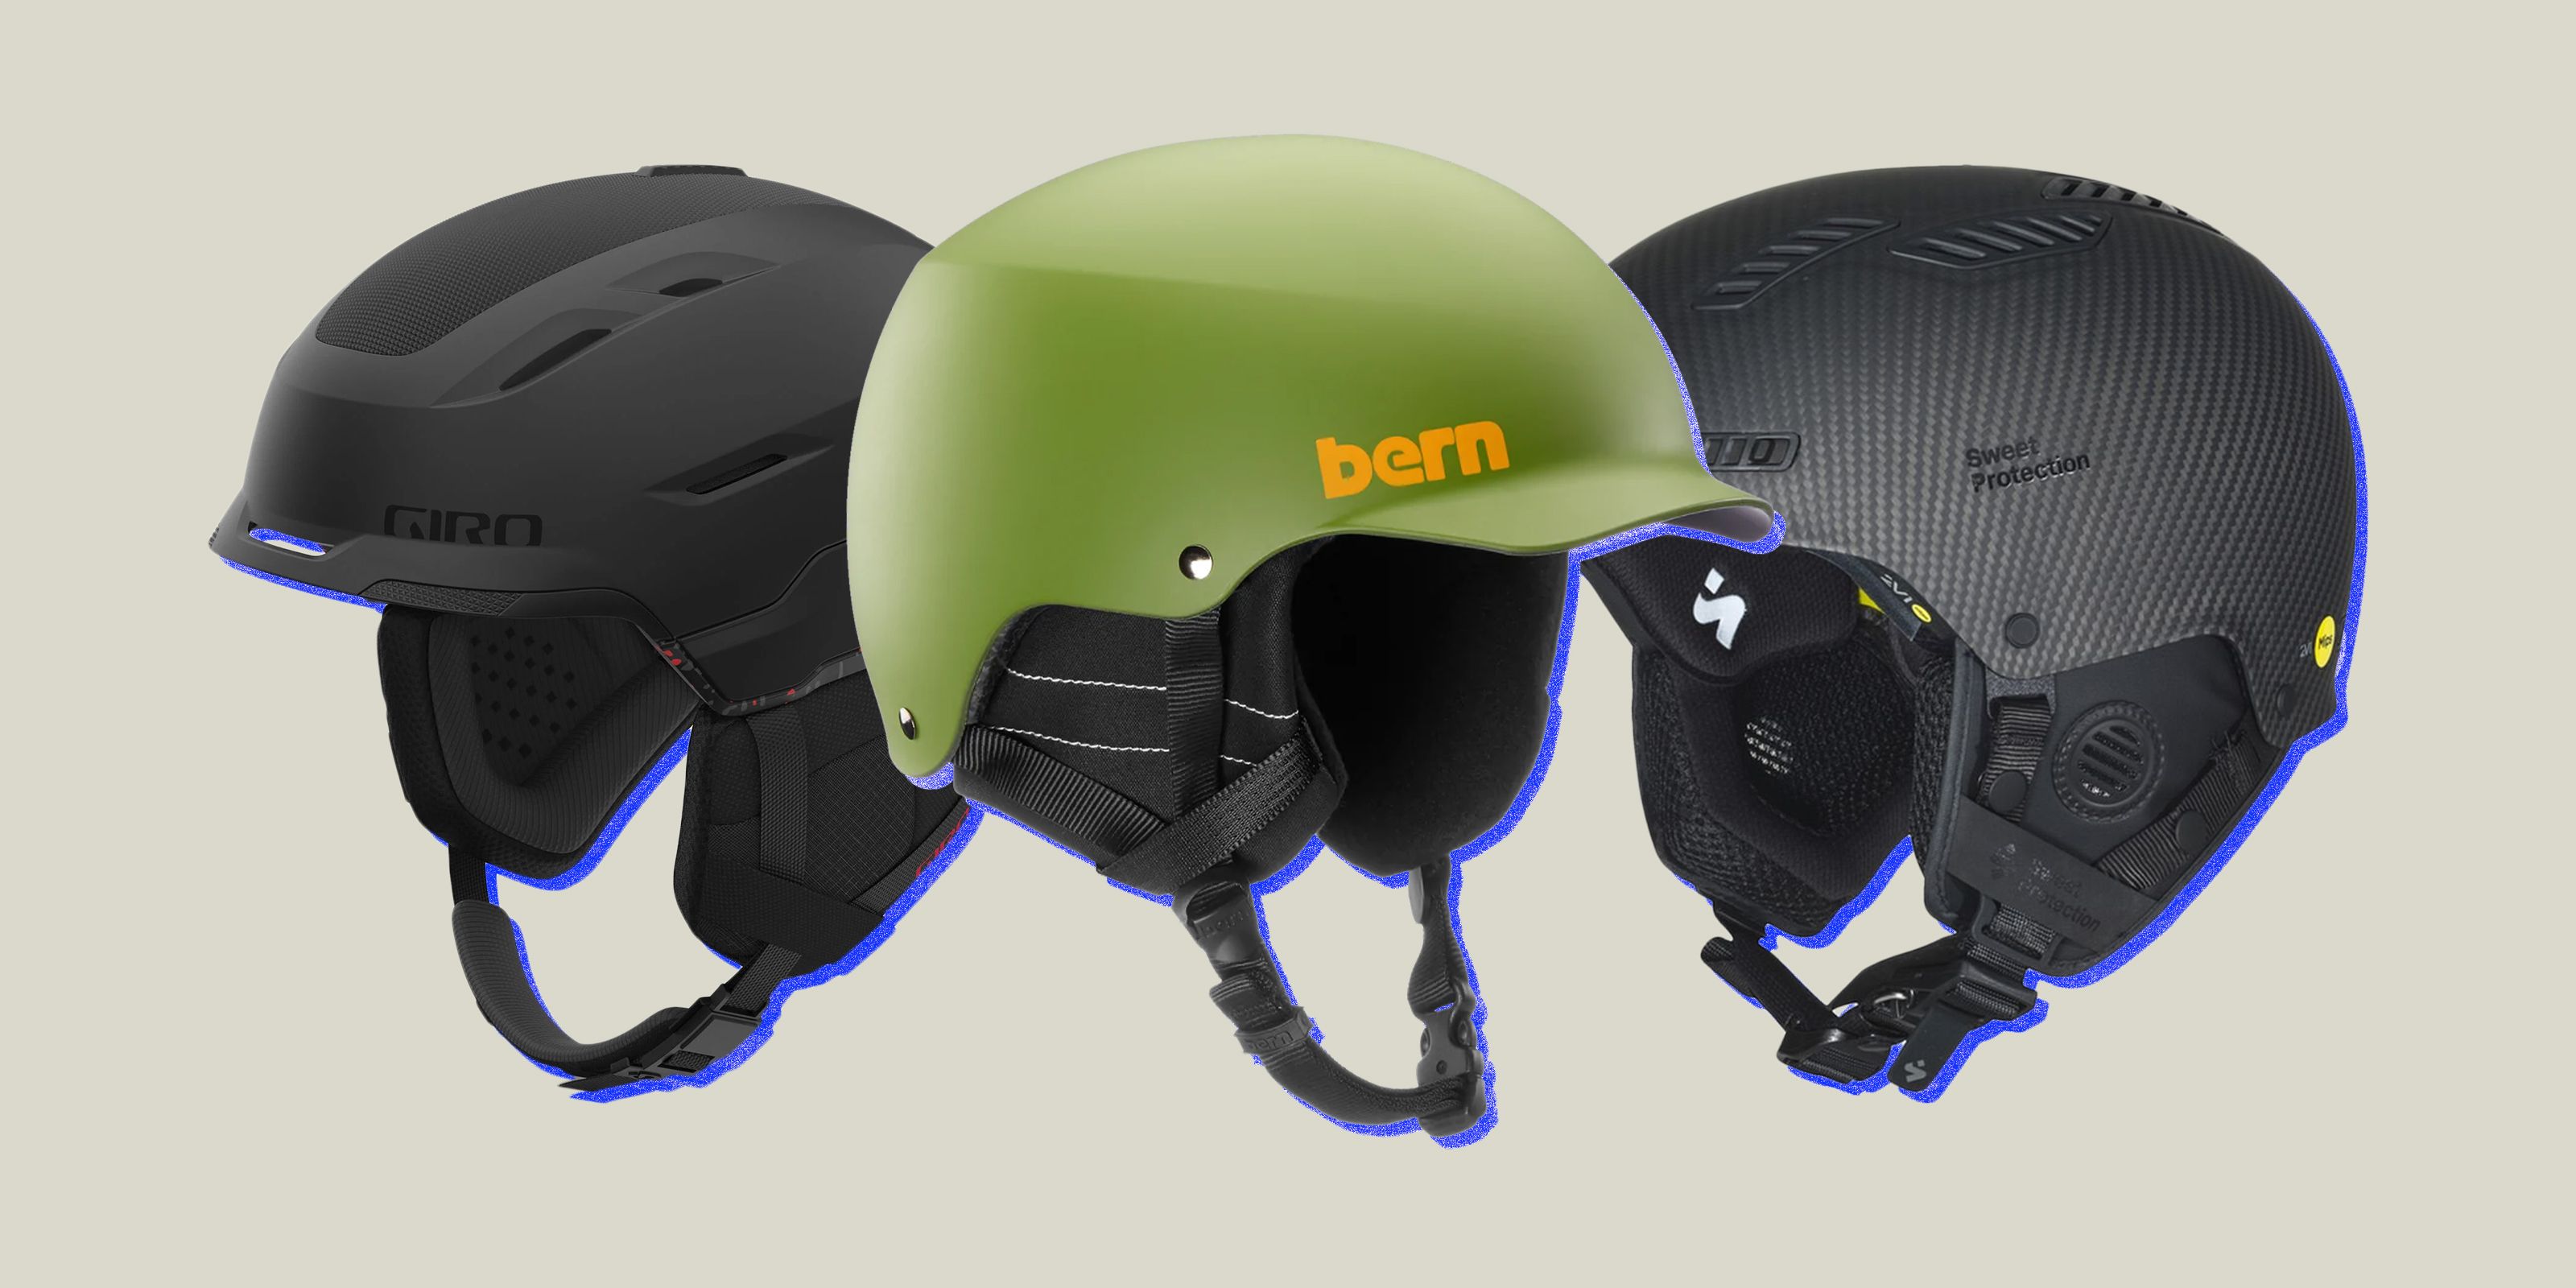 The Best Ski Helmets Available